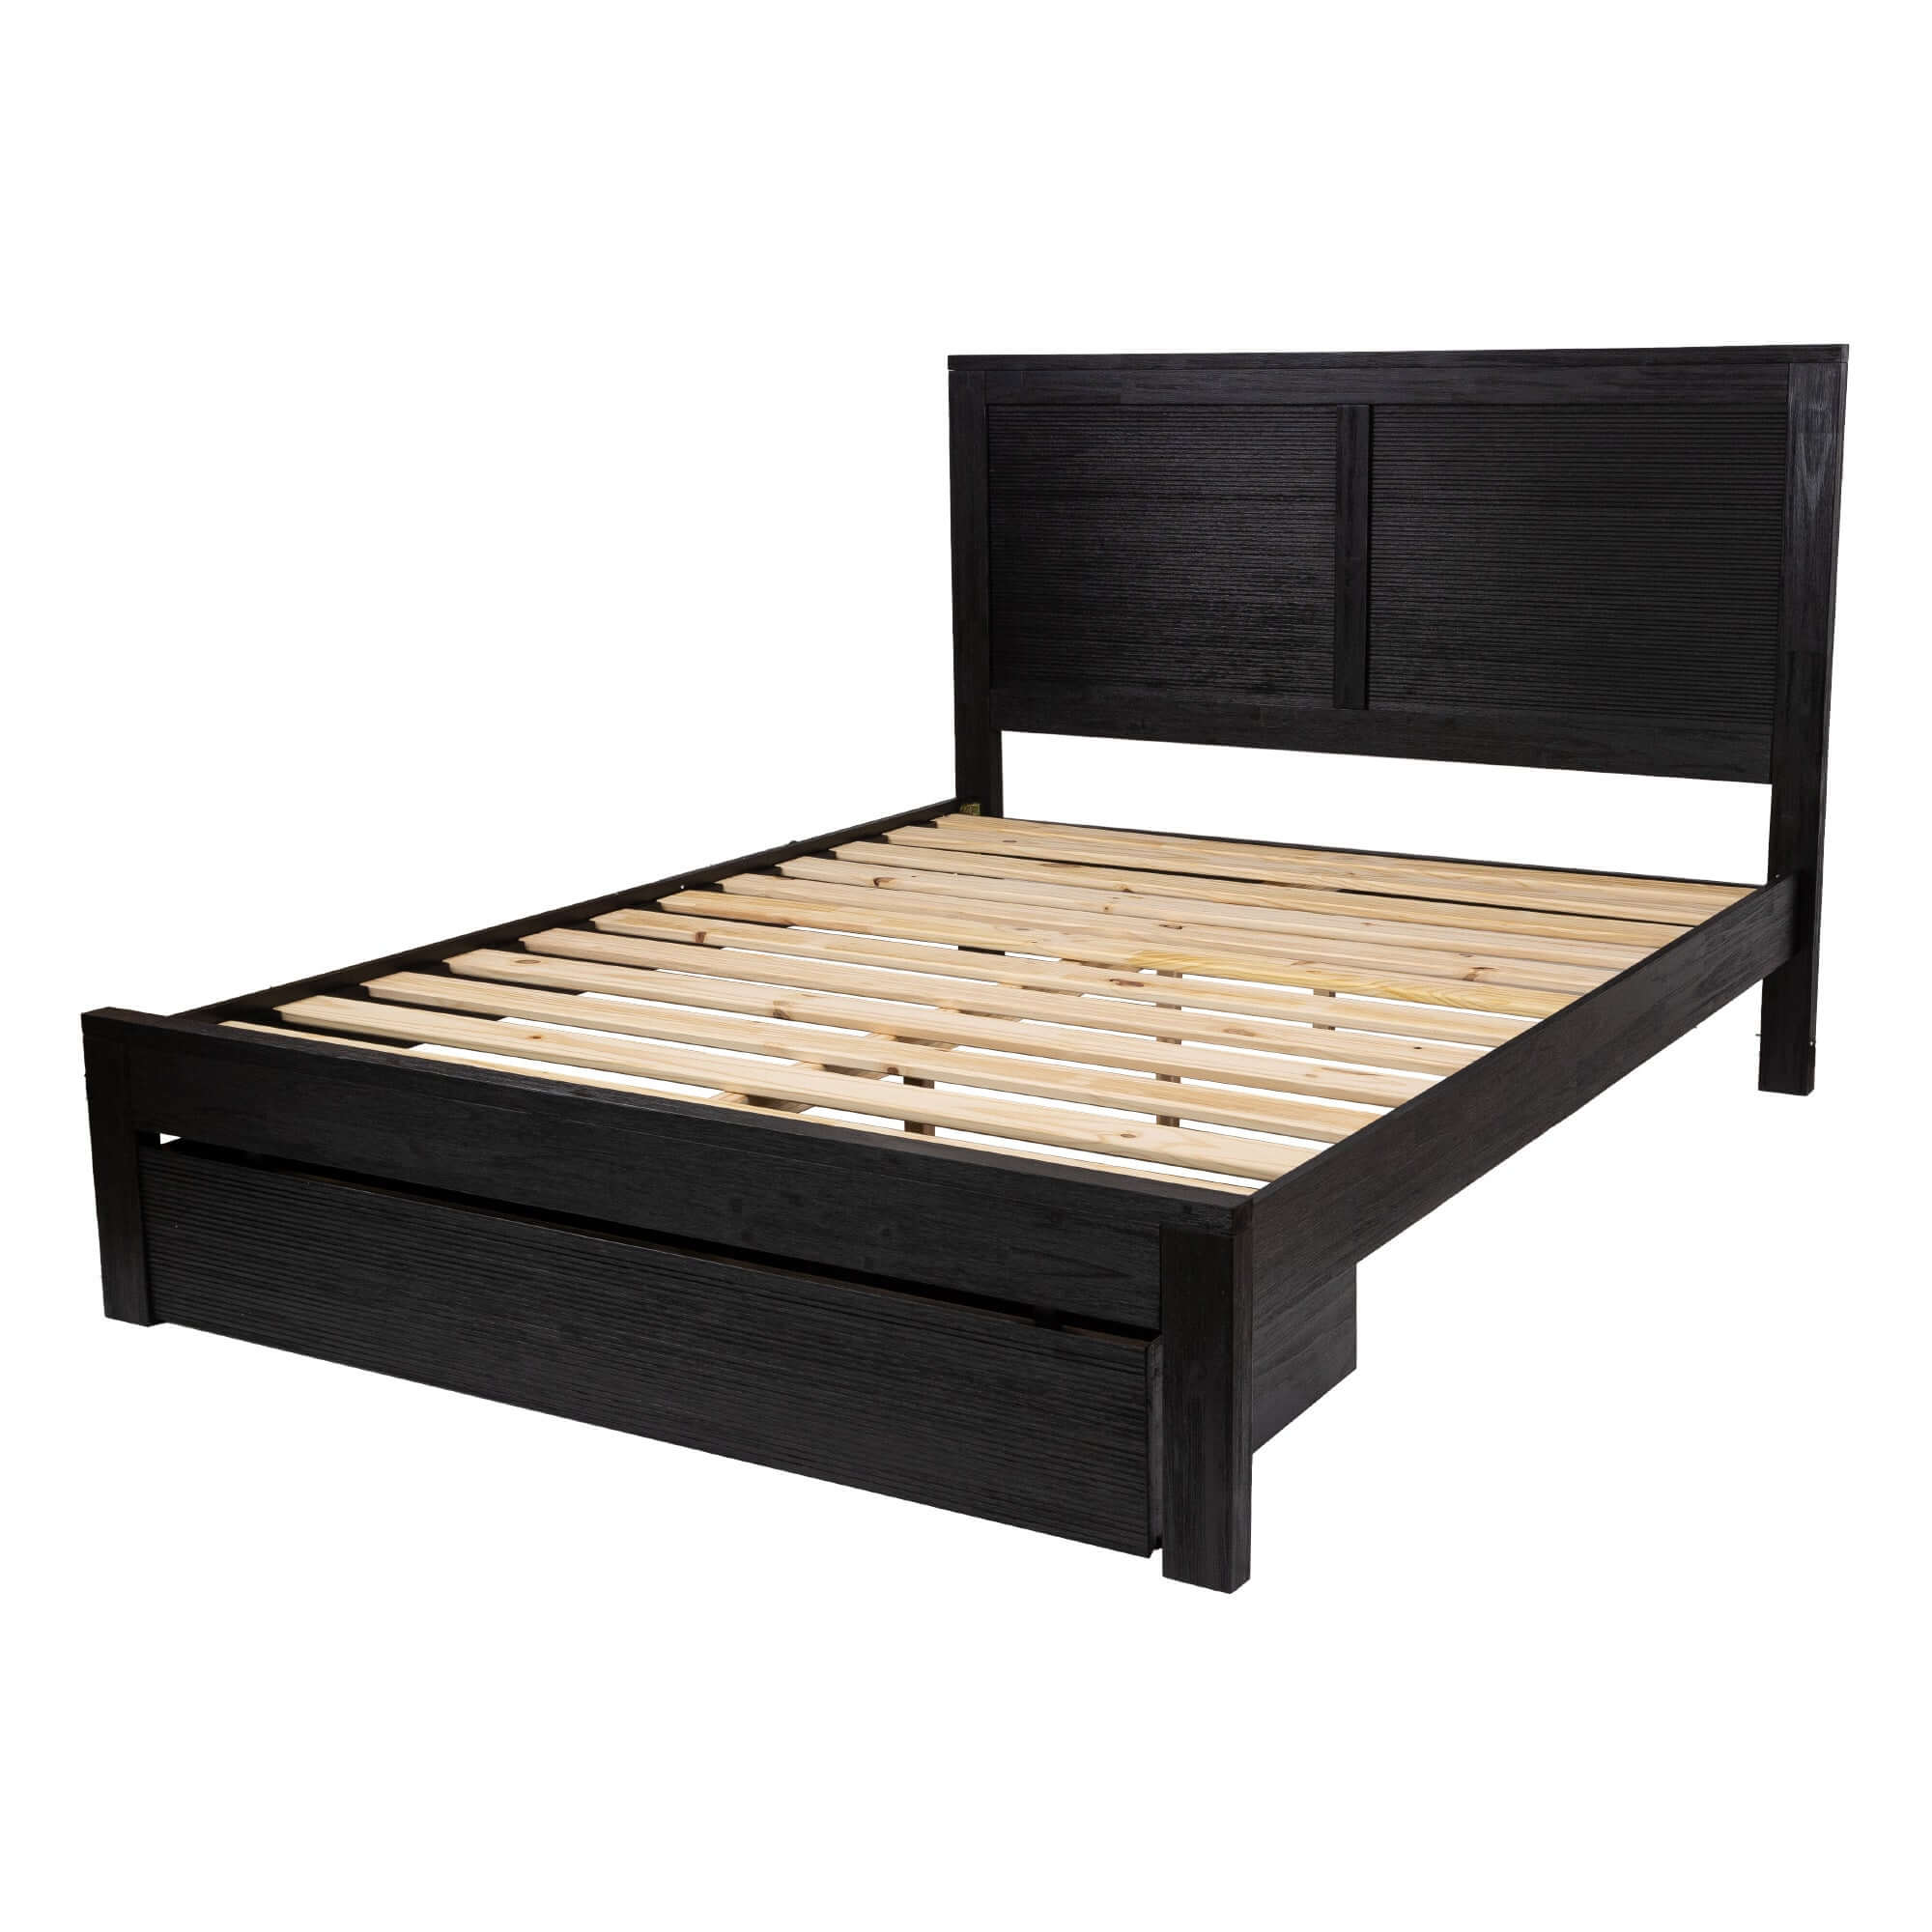 King-Size Tofino Bed Frame with Storage - Black-Upinteriors